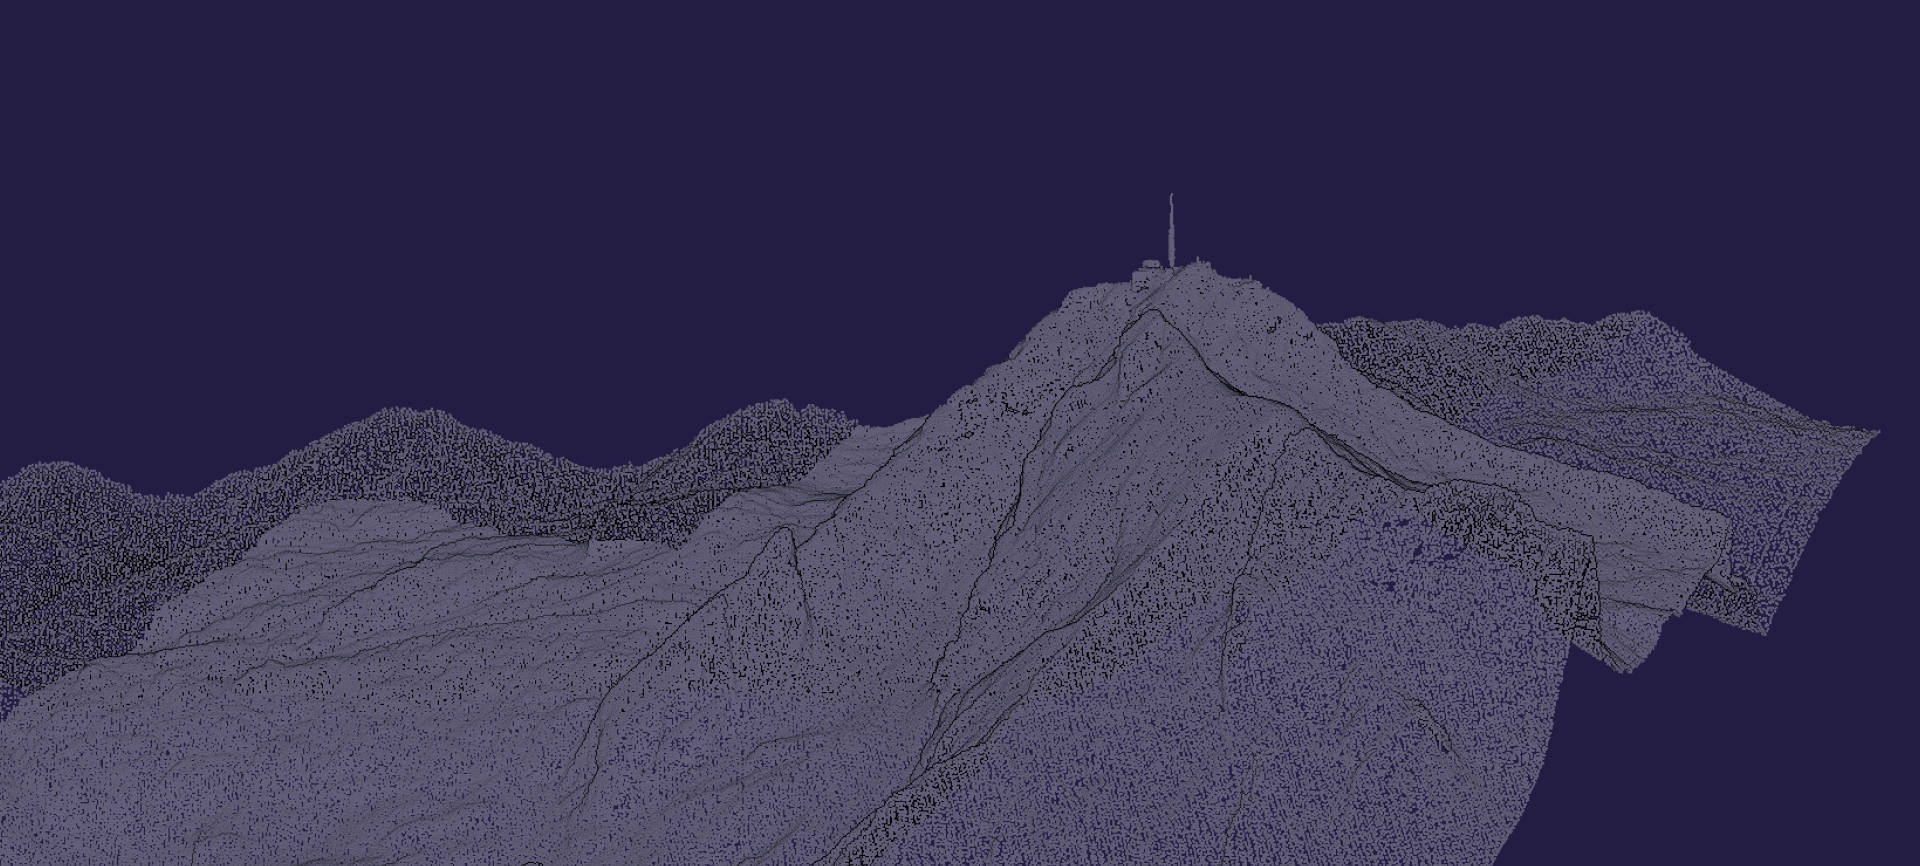 Wide point cloud of a mountain with visible peak